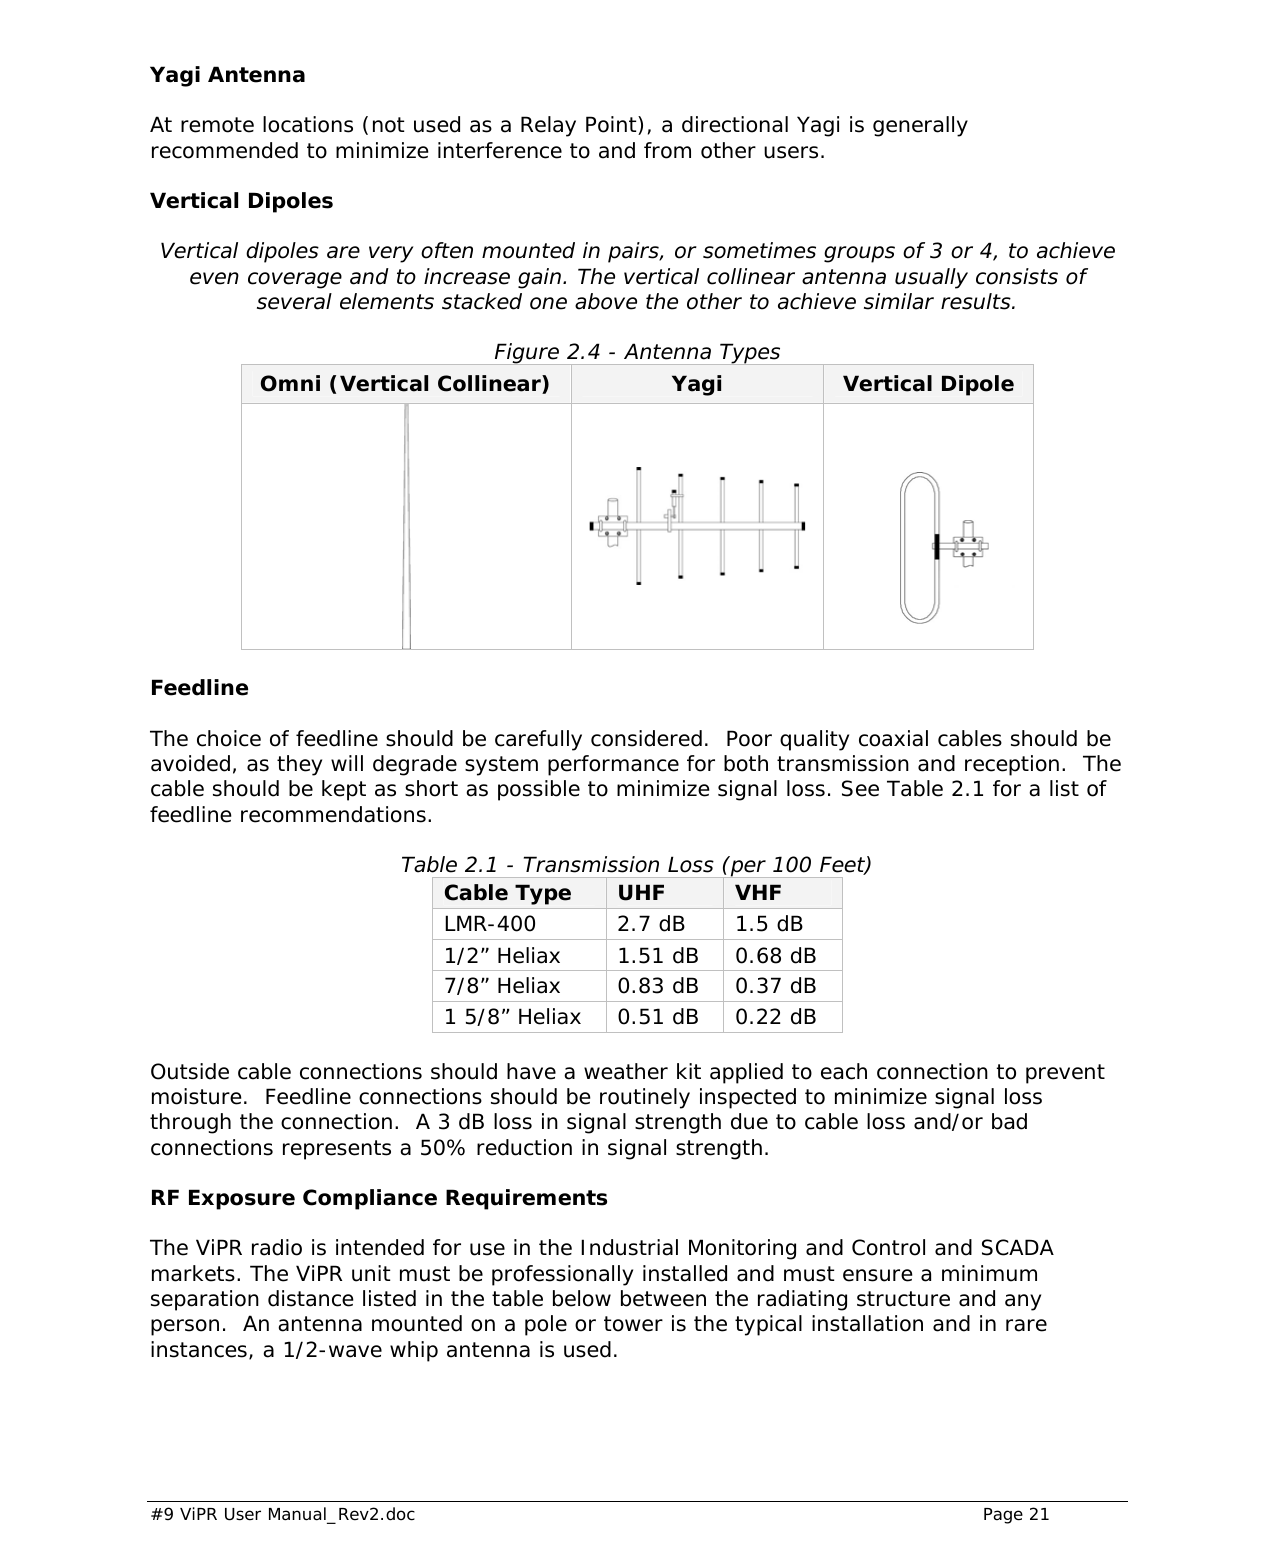  #9 ViPR User Manual_Rev2.doc    Page 21 Yagi Antenna At remote locations (not used as a Relay Point), a directional Yagi is generally recommended to minimize interference to and from other users.  Vertical Dipoles Vertical dipoles are very often mounted in pairs, or sometimes groups of 3 or 4, to achieve even coverage and to increase gain. The vertical collinear antenna usually consists of several elements stacked one above the other to achieve similar results. Figure 2.4 - Antenna Types Omni (Vertical Collinear)  Yagi  Vertical Dipole    Feedline The choice of feedline should be carefully considered.  Poor quality coaxial cables should be avoided, as they will degrade system performance for both transmission and reception.  The cable should be kept as short as possible to minimize signal loss. See Table 2.1 for a list of feedline recommendations.  Table 2.1 - Transmission Loss (per 100 Feet) Cable Type  UHF  VHF LMR-400  2.7 dB  1.5 dB 1/2” Heliax  1.51 dB  0.68 dB 7/8” Heliax  0.83 dB  0.37 dB 1 5/8” Heliax  0.51 dB  0.22 dB  Outside cable connections should have a weather kit applied to each connection to prevent moisture.  Feedline connections should be routinely inspected to minimize signal loss through the connection.  A 3 dB loss in signal strength due to cable loss and/or bad connections represents a 50% reduction in signal strength. RF Exposure Compliance Requirements The ViPR radio is intended for use in the Industrial Monitoring and Control and SCADA markets. The ViPR unit must be professionally installed and must ensure a minimum separation distance listed in the table below between the radiating structure and any person.  An antenna mounted on a pole or tower is the typical installation and in rare instances, a 1/2-wave whip antenna is used.      